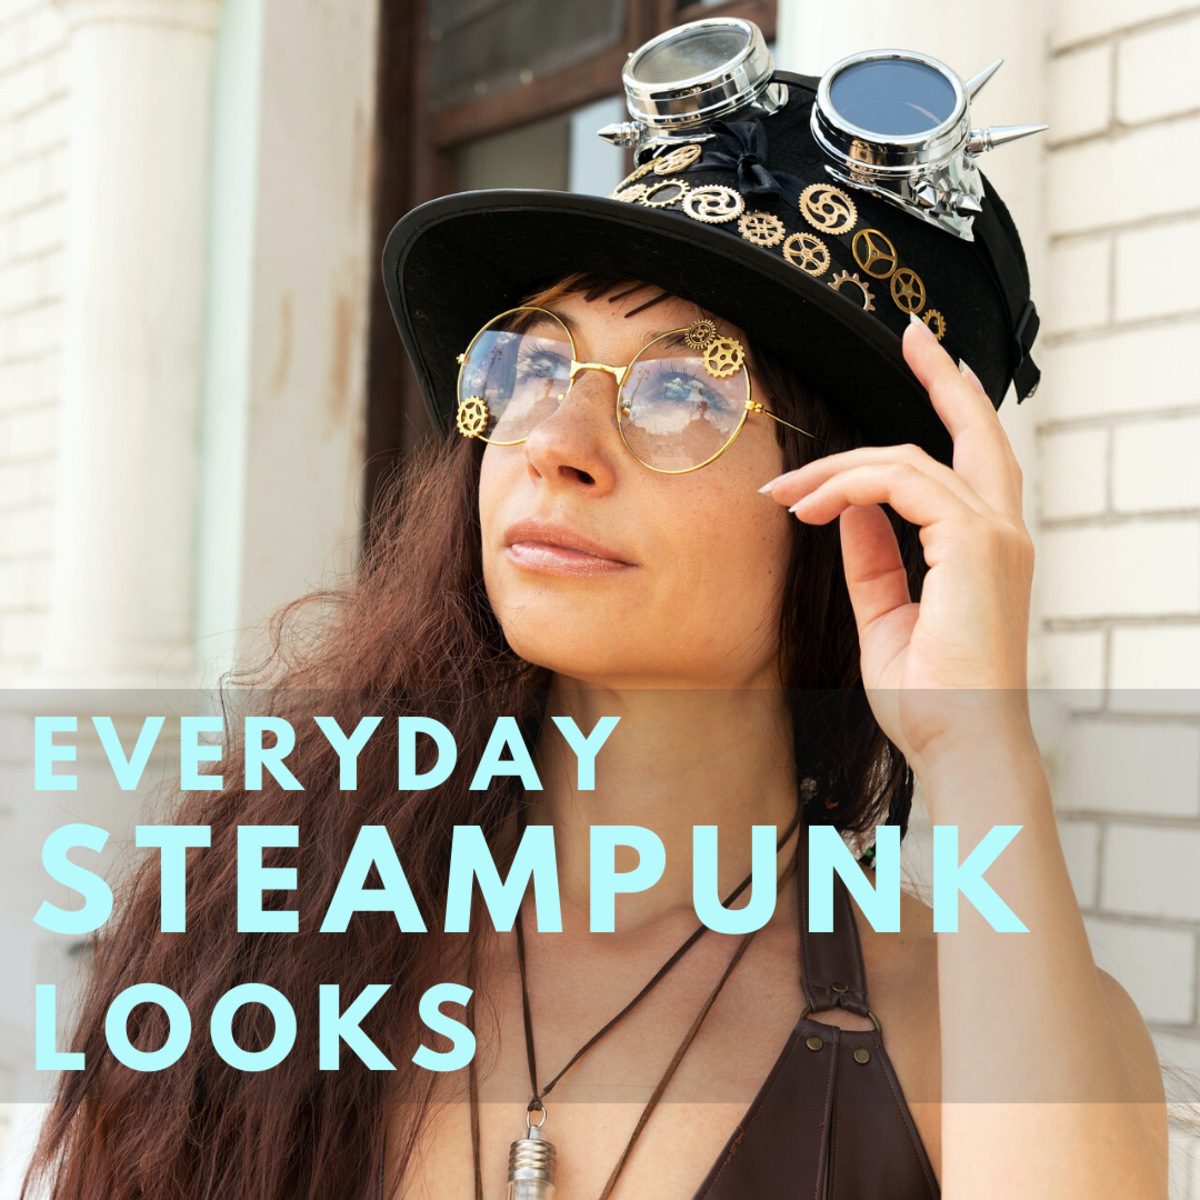 How to Incorporate Steampunk Into Your Daily Signature Look